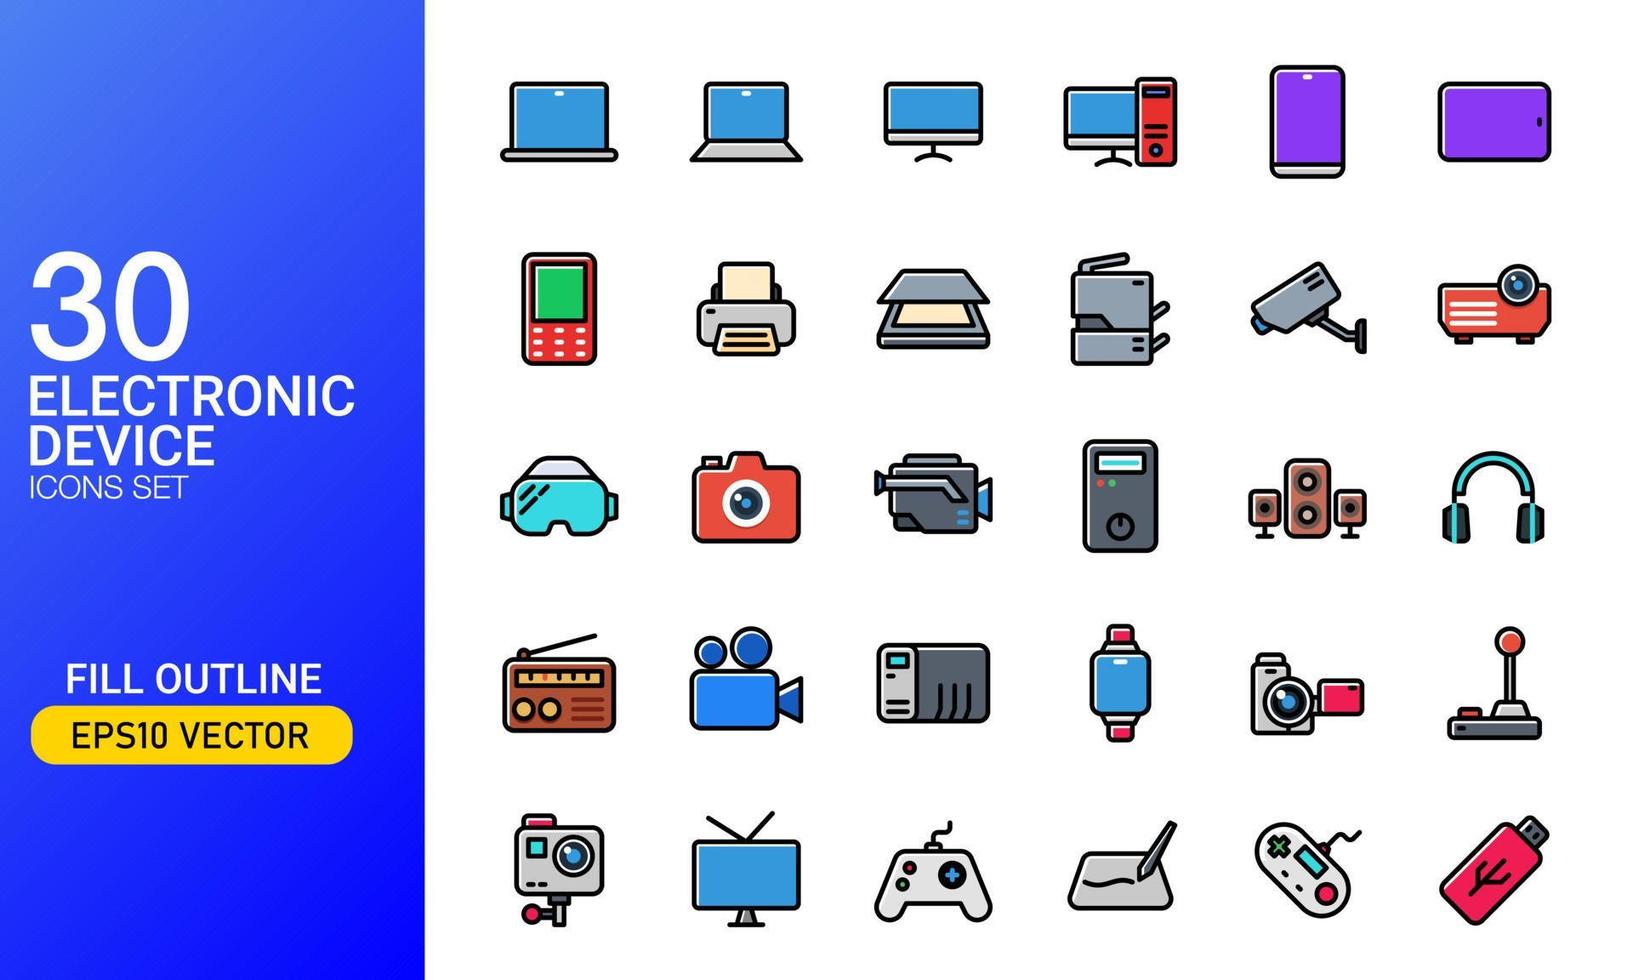 Electronic device icon set. Collection of gadget, computer, and electronic tool icon in filled outlined style. vector